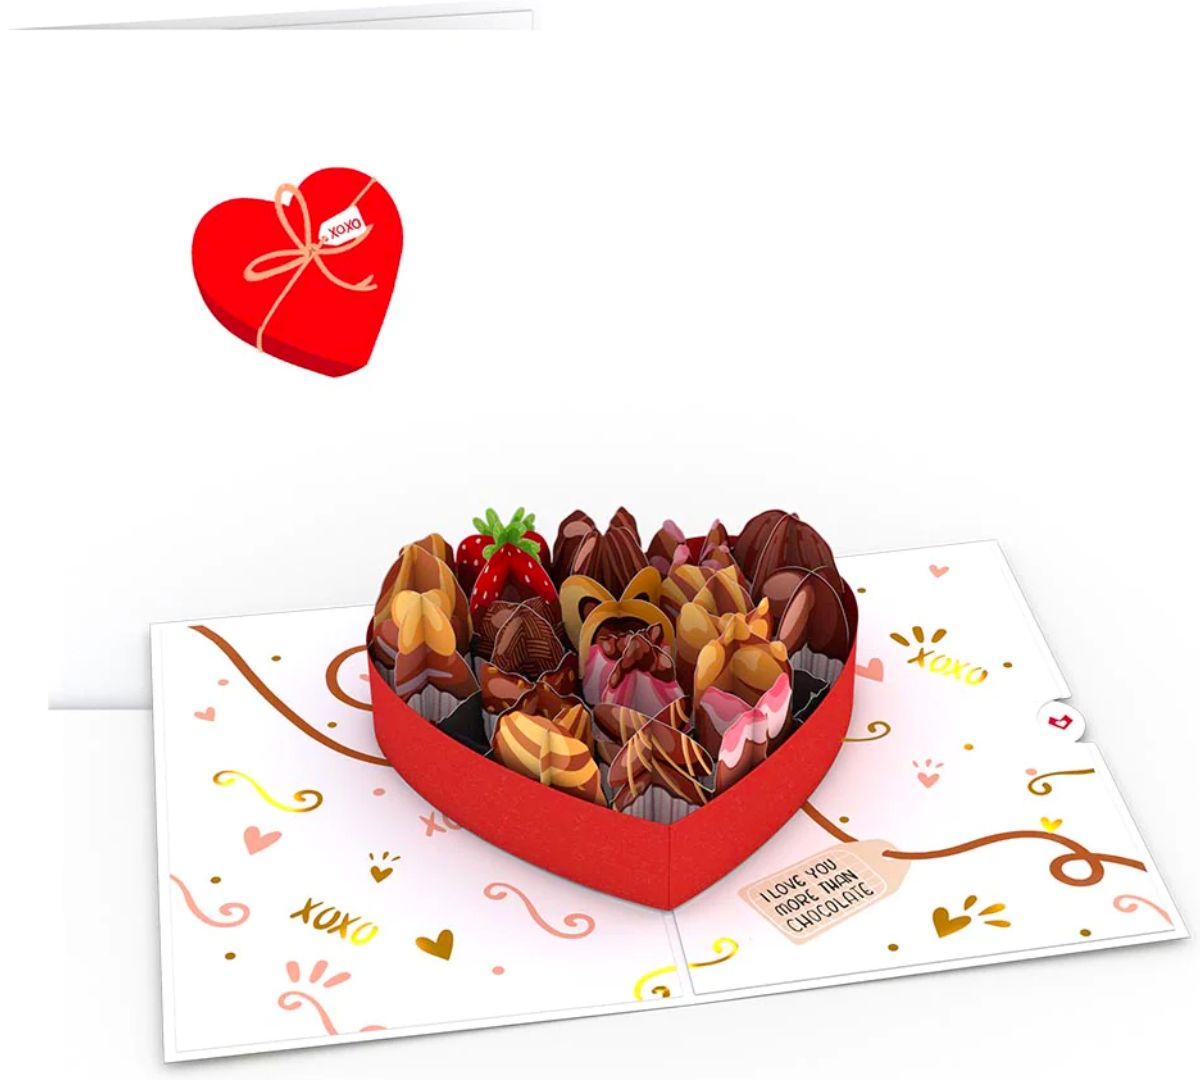 Love You More Than Chocolate Pop-Up Card stock image showing front and inside popup of a large heart shaped box of chocolates